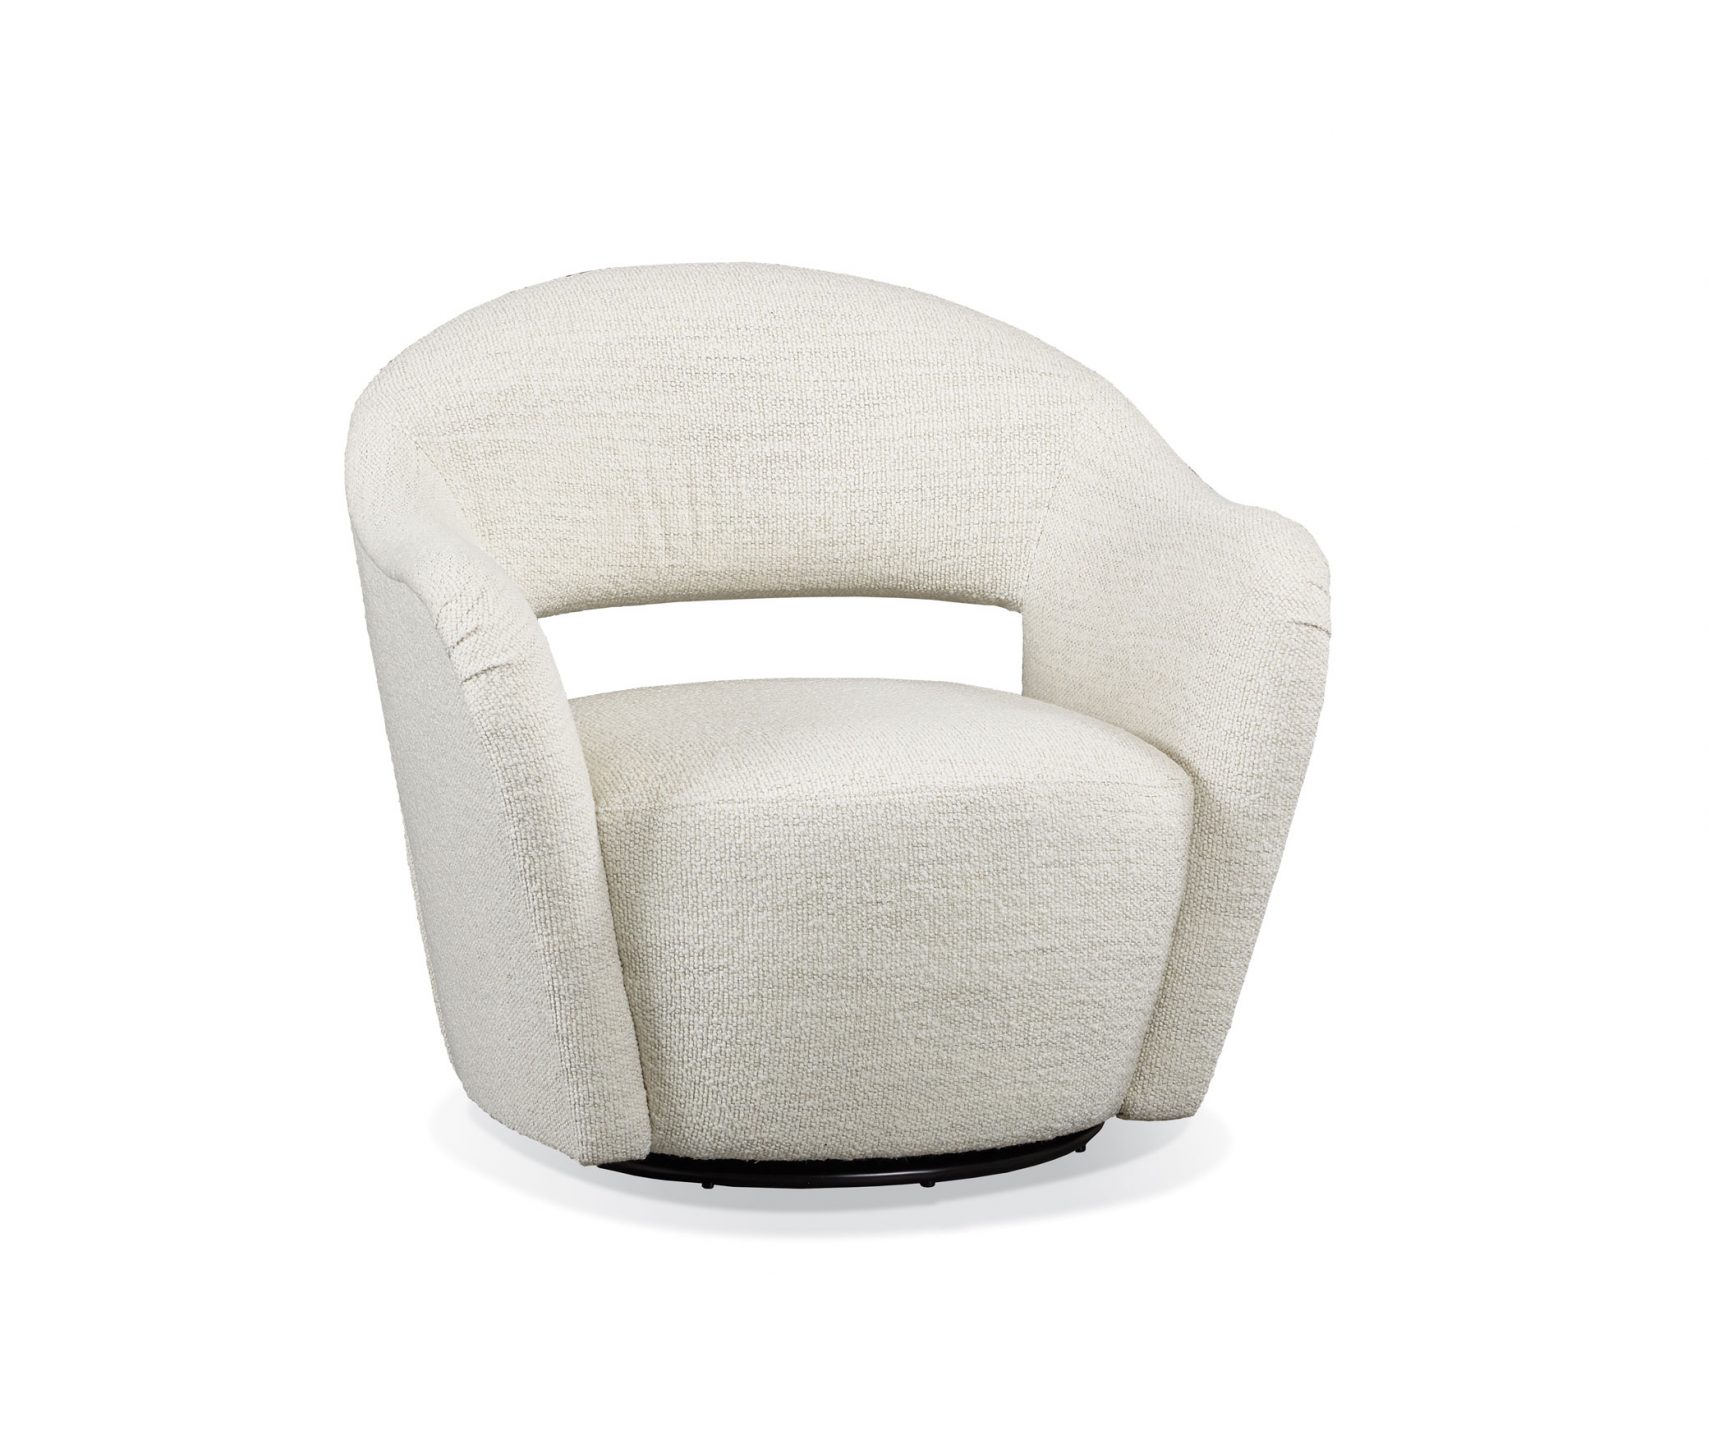 Sherrill-Furniture-Brands_Suzette-Swivel-Chair_int_products